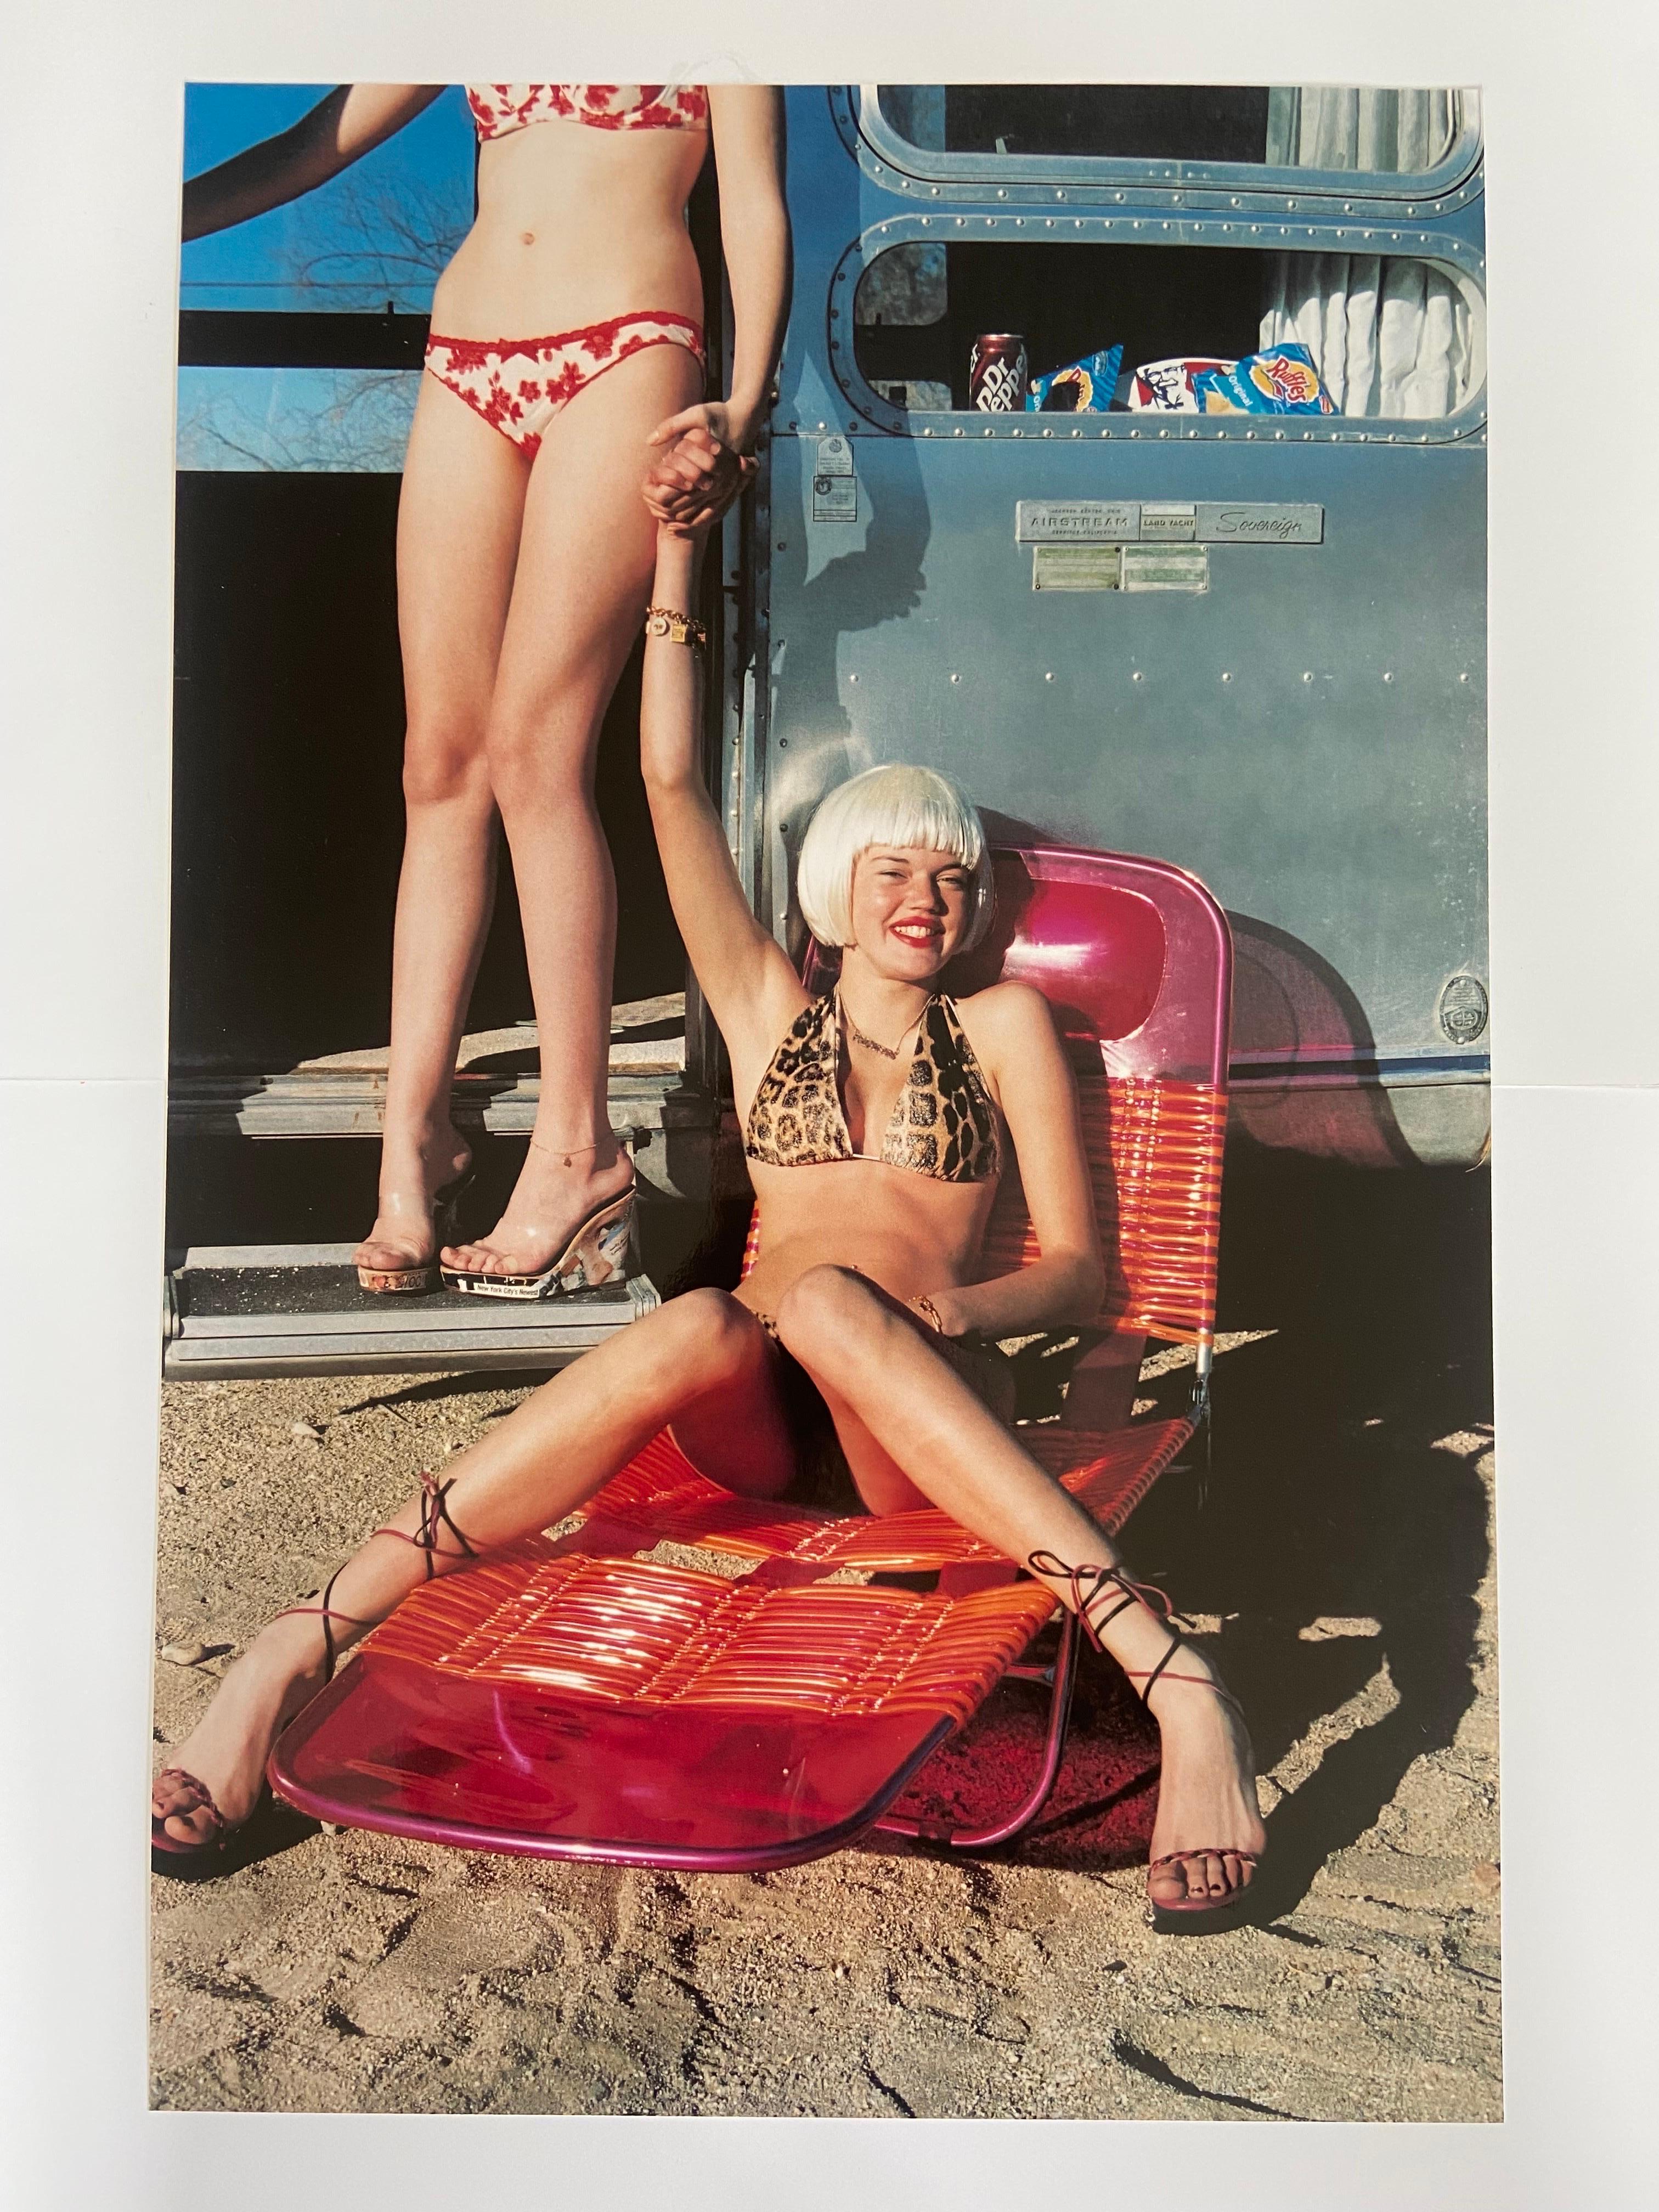 Swiss Original Photo Limited to Photography by Helmut Newton Printed in 2002 For Sale